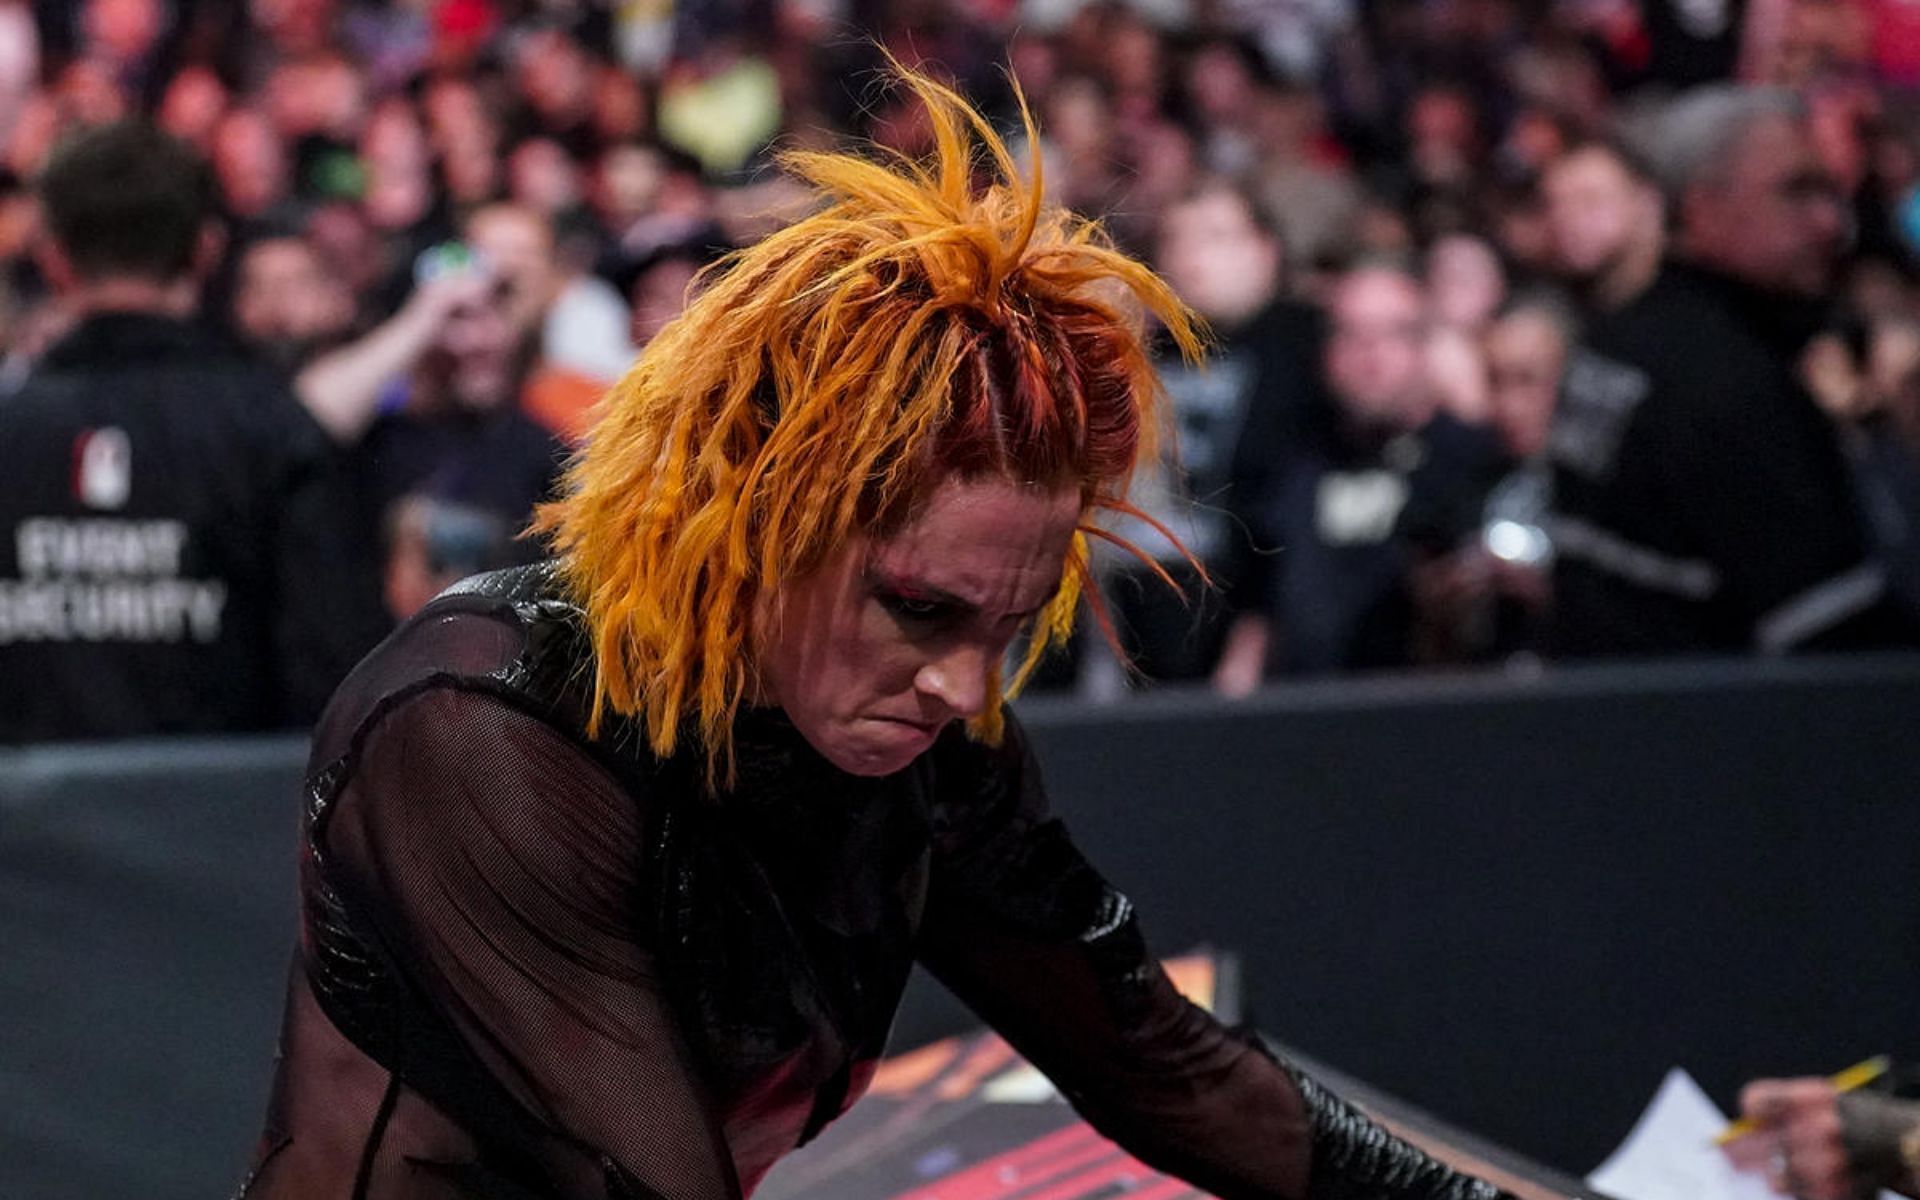 Becky Lynch has recently been betrayed